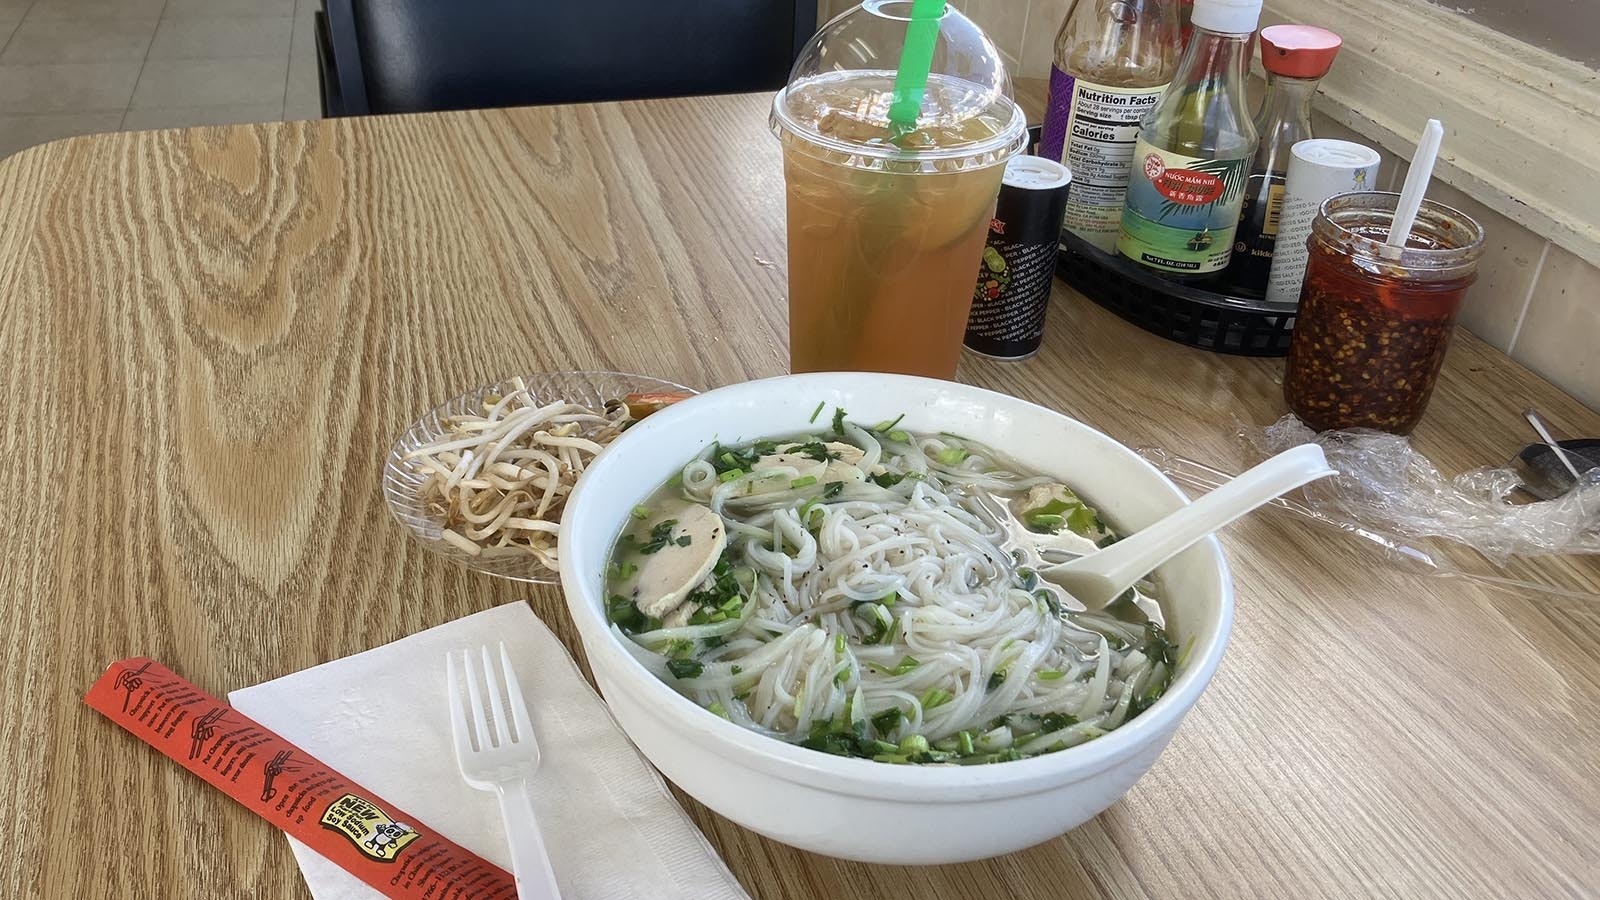 Cowboy State Daily recently tried the Pho Ga dish at Pho Saigon. The pho soups come with hot broth seasoned with spices and herbs filled with rice noodles and a side of bean sprouts, lime and hot peppers that can be added to the soup as desired.